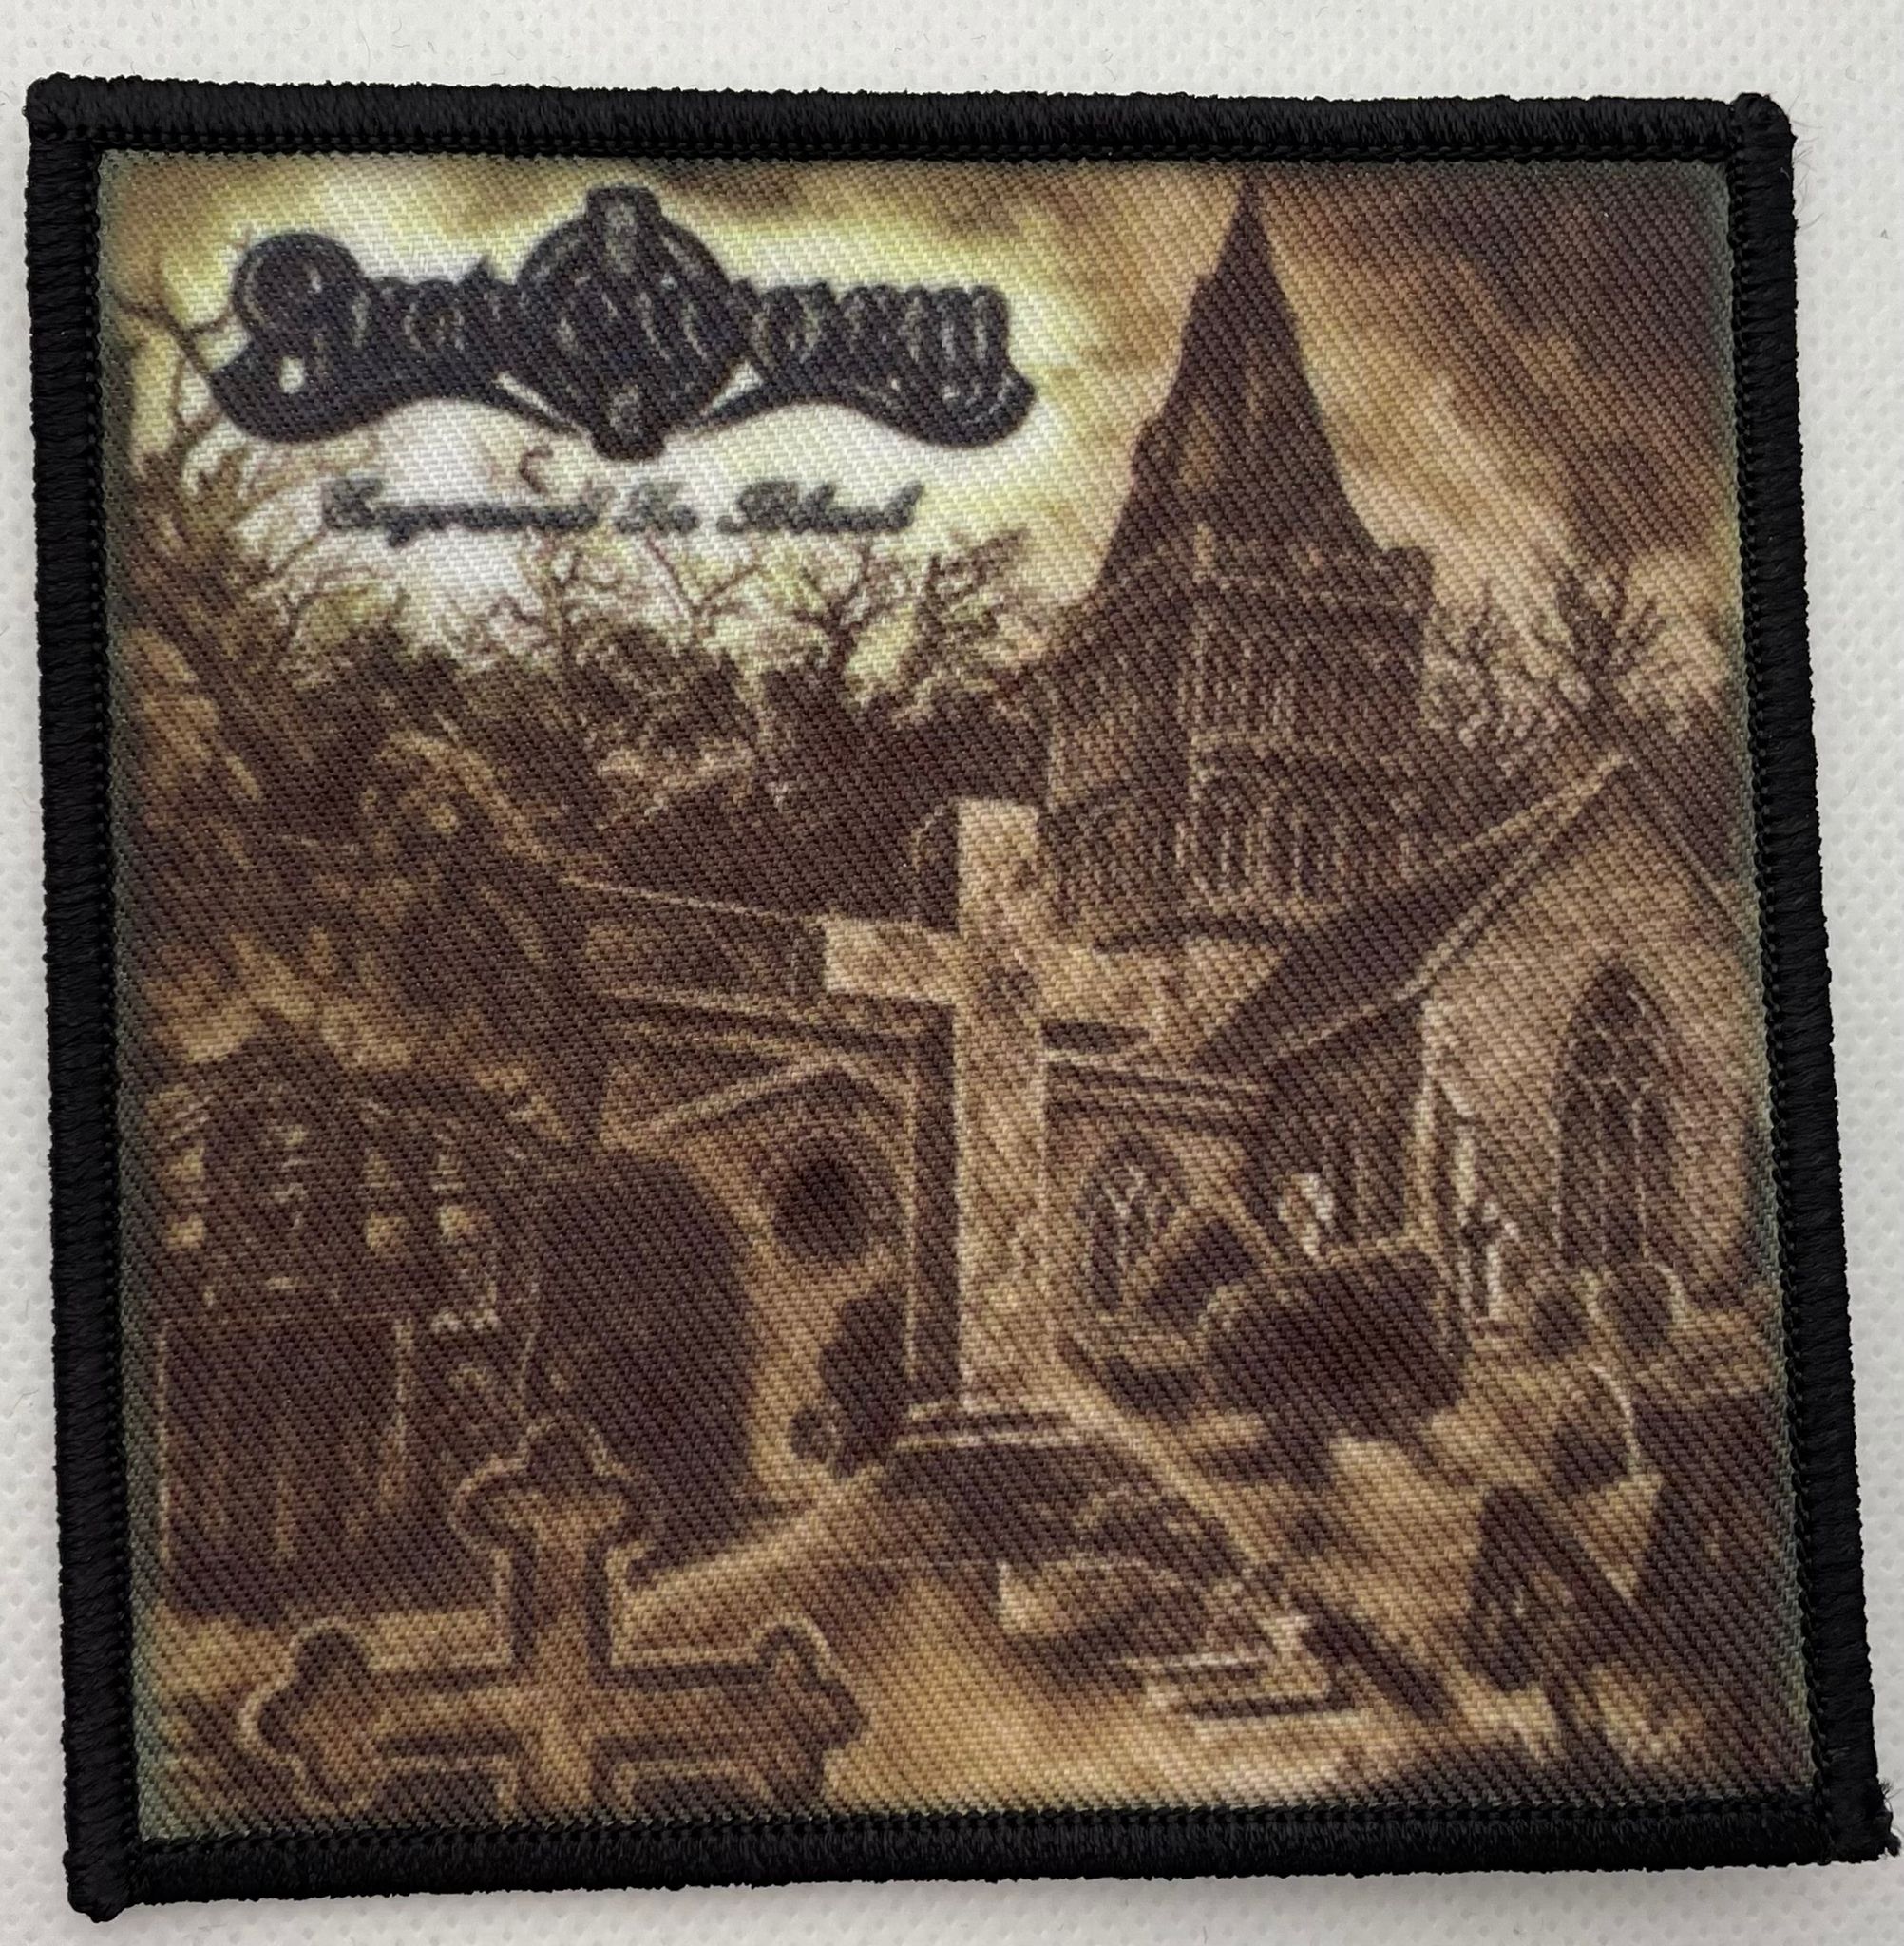 Graveworm - Engraved In Black (printed) Patch